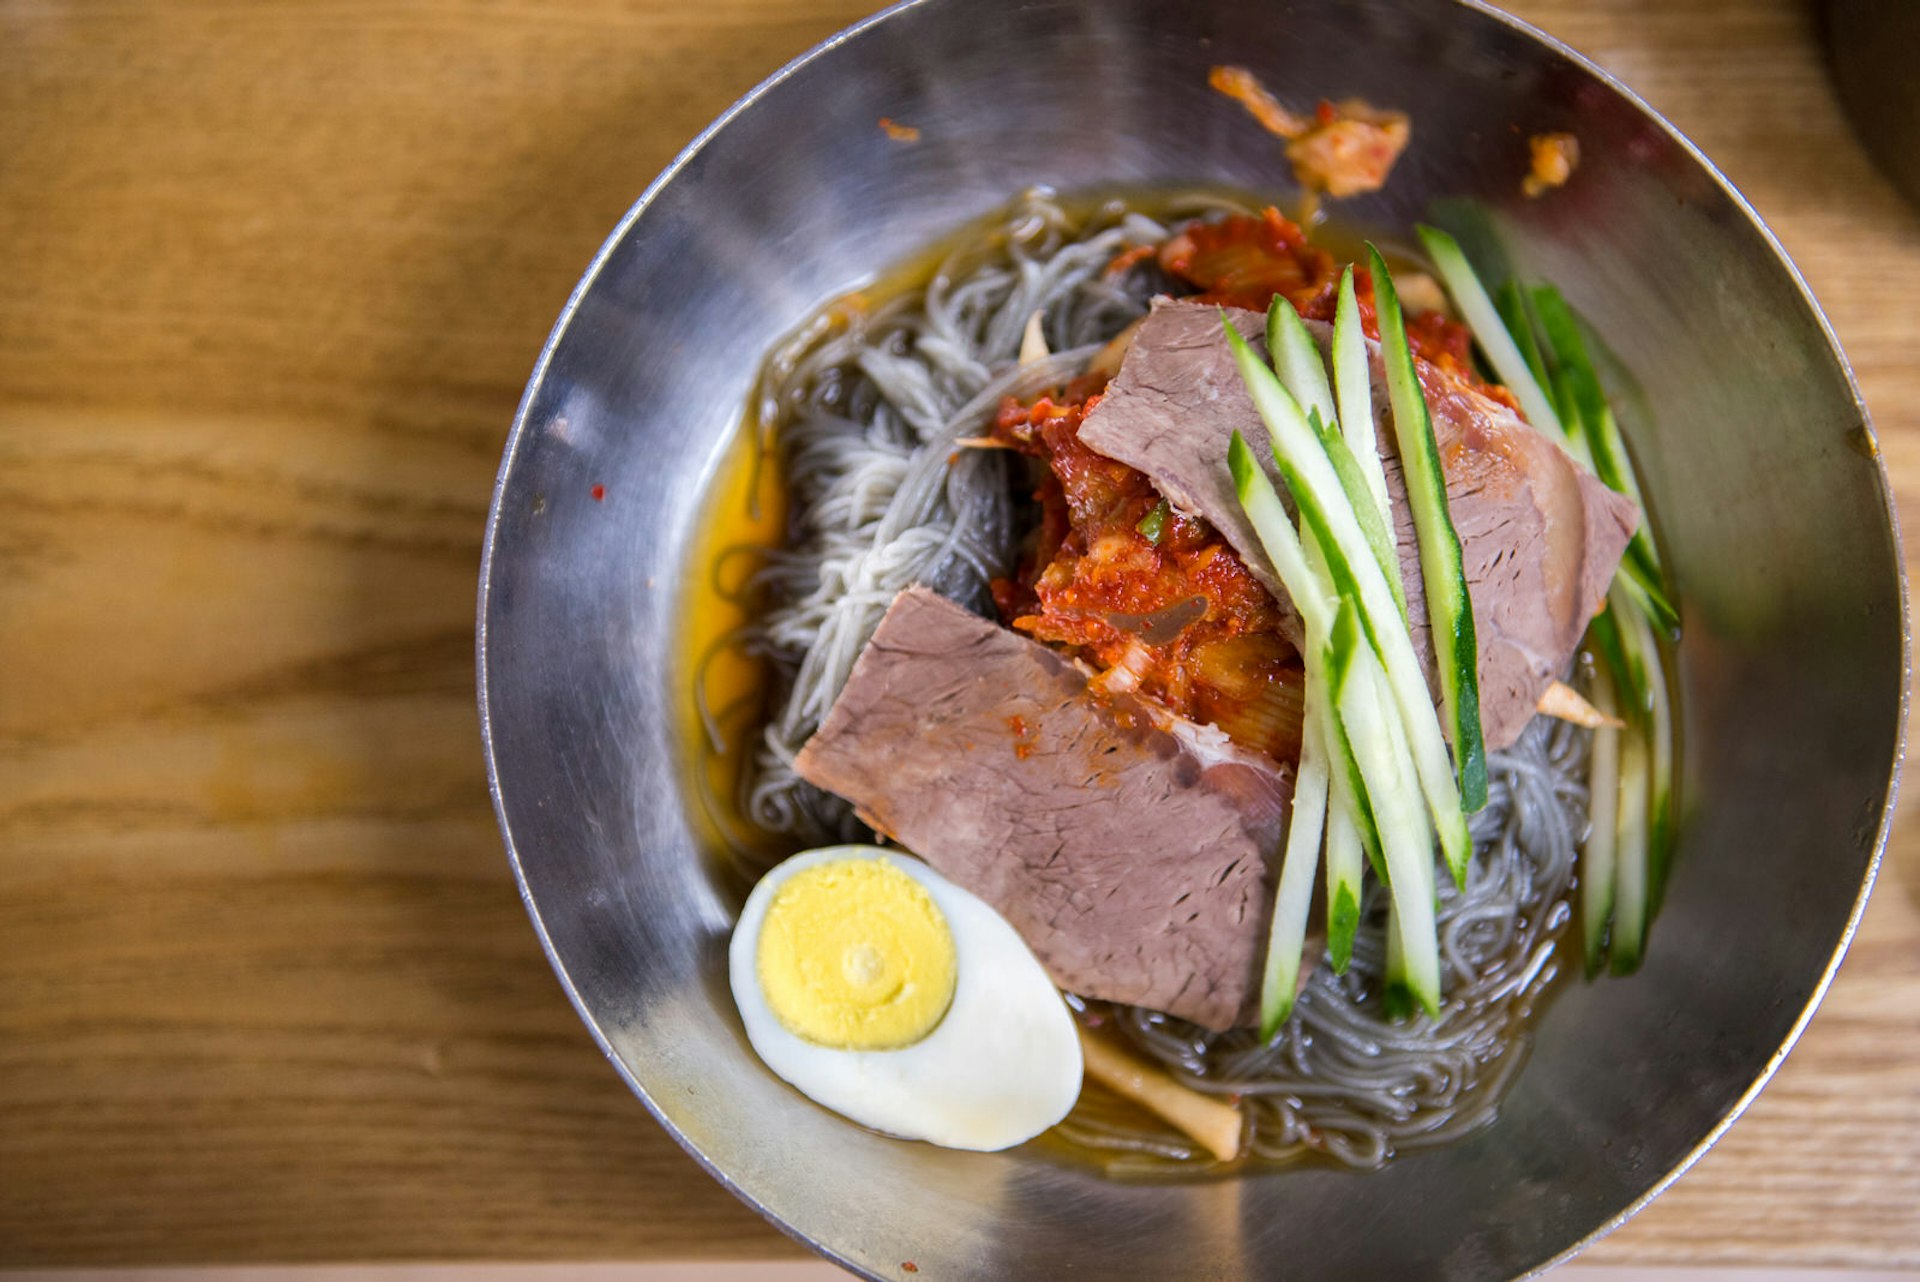 Naengmyeon may be served cold, but chilli brings the heat © Phung Huynh Vu Qui / Getty Images